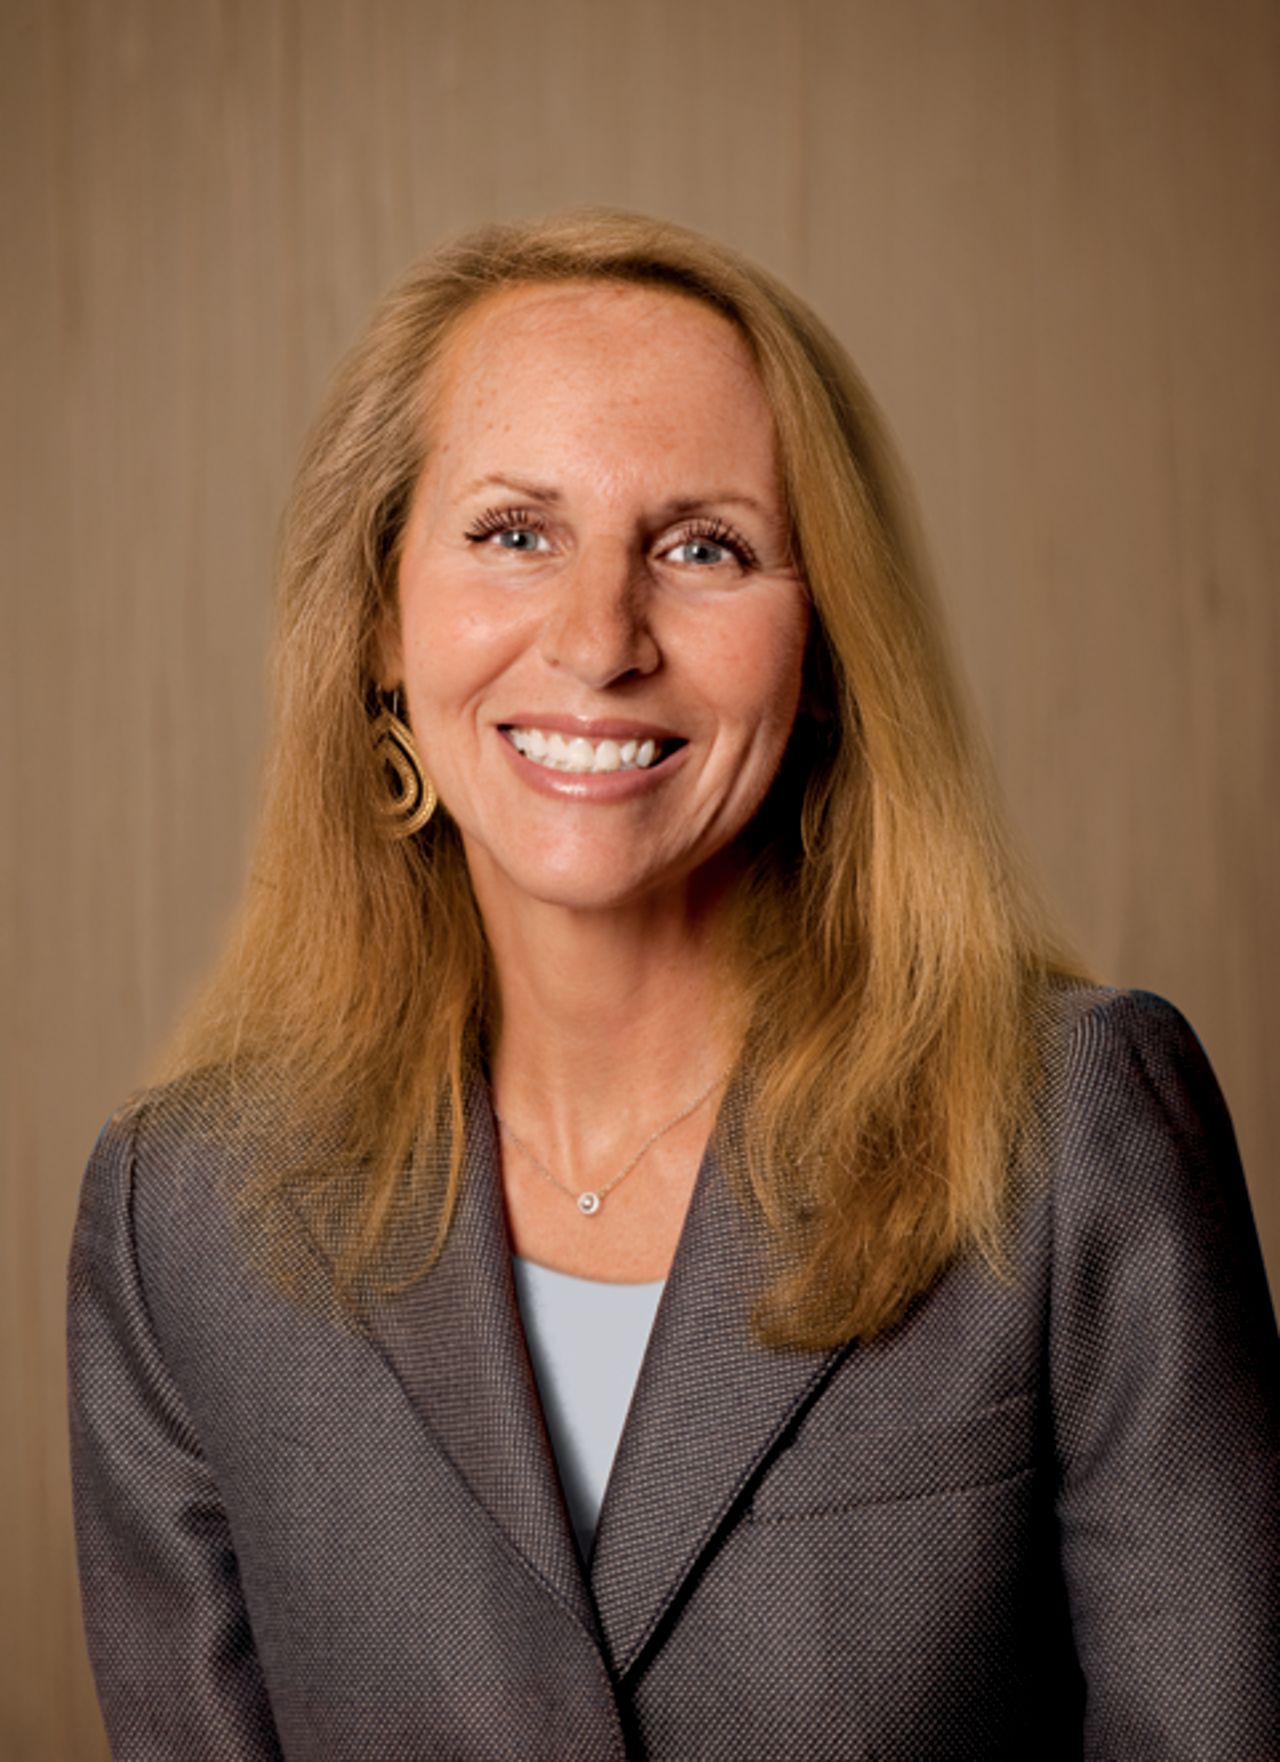 Carol Meyrowitz is the CEO of retail clothing firm TJX. The company ranked 115th in this year's Fortune 500 list.